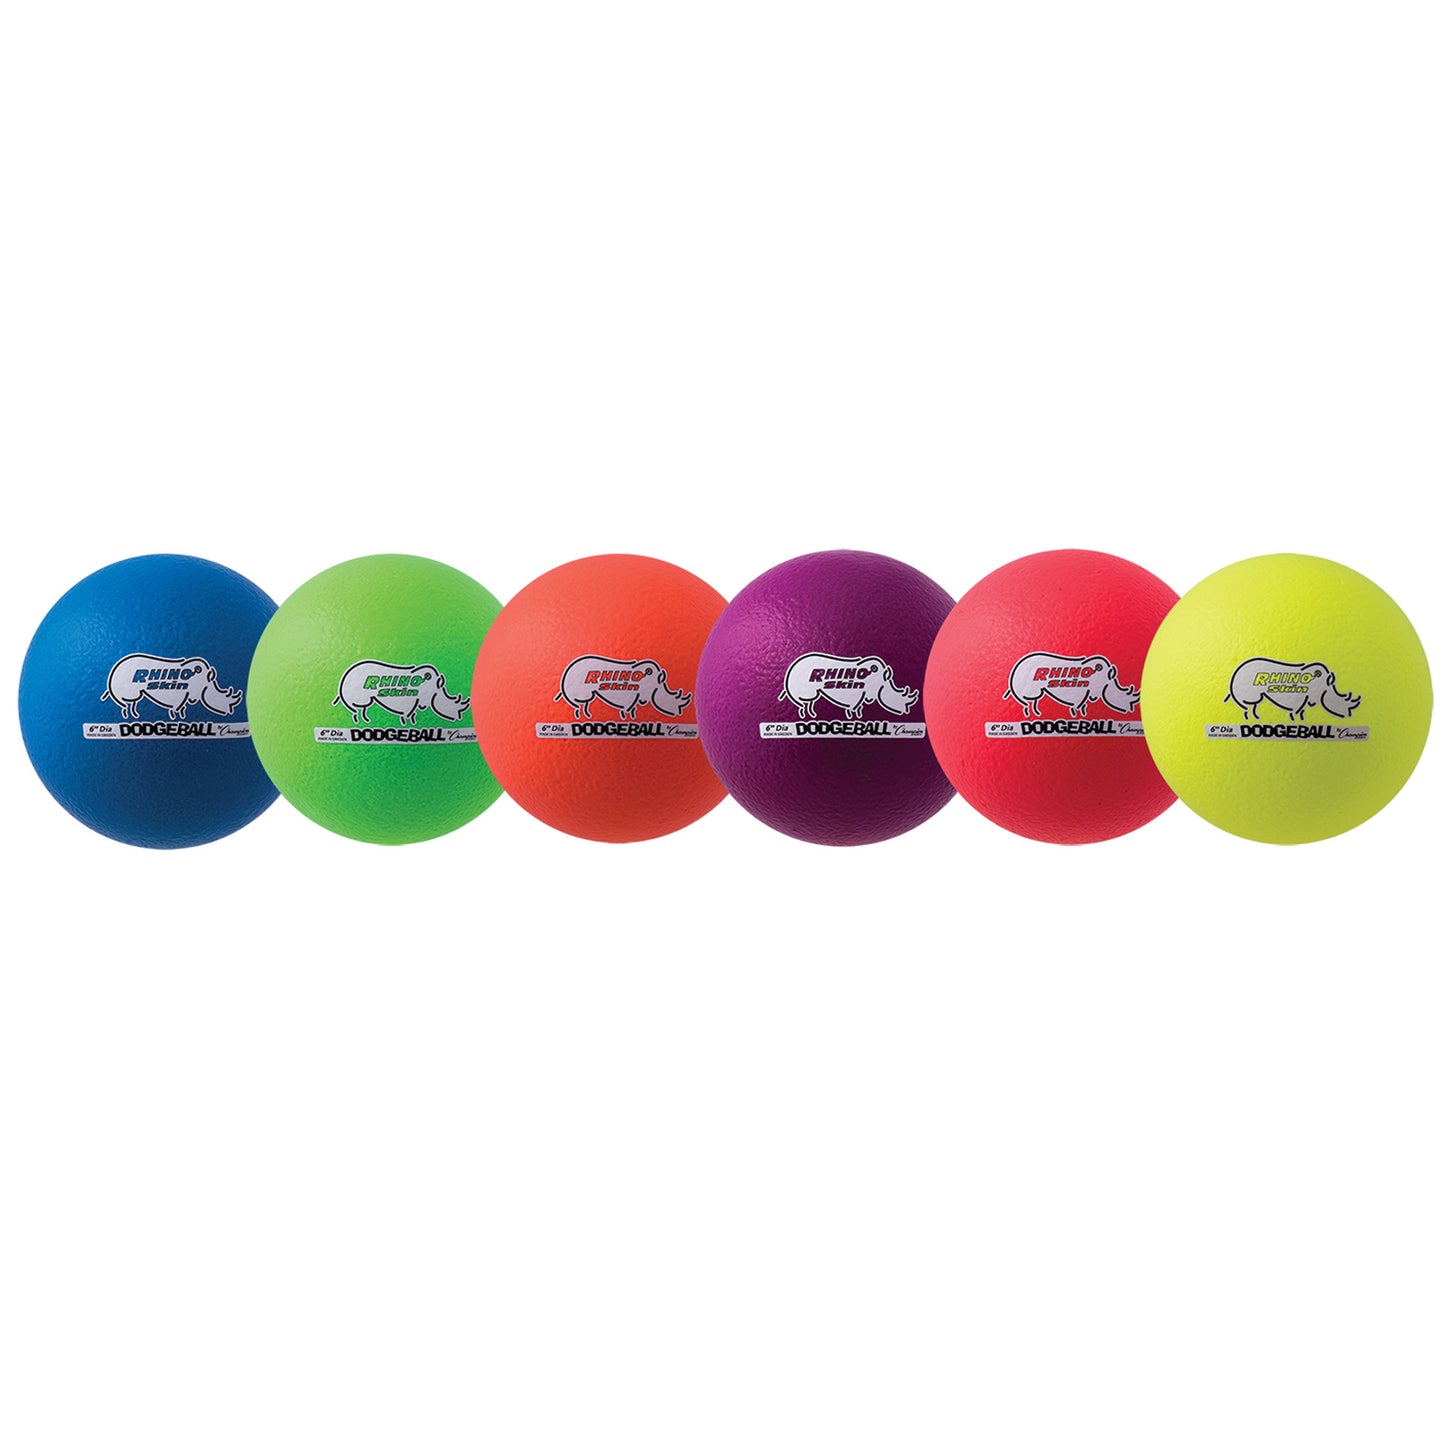 Rhino Skin® 6-Inch Low Bounce Dodgeball Set, Assorted Neon Colors, Set of 6